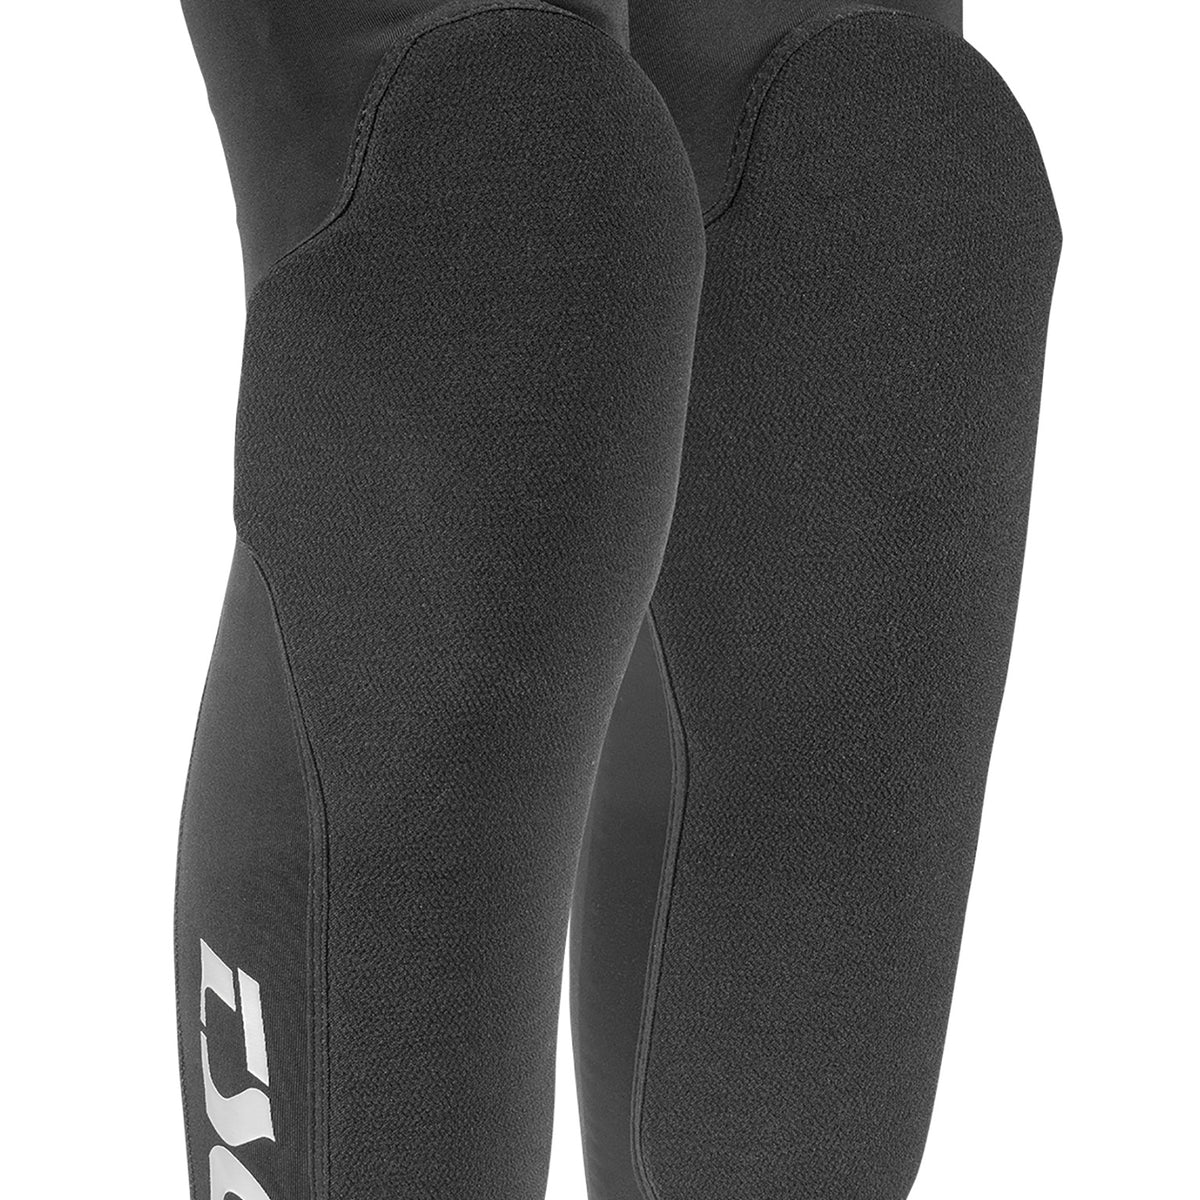 Dermis Pro A Youth Knee-Sleeve TSG Knee- and Shinguards in black – TITUS